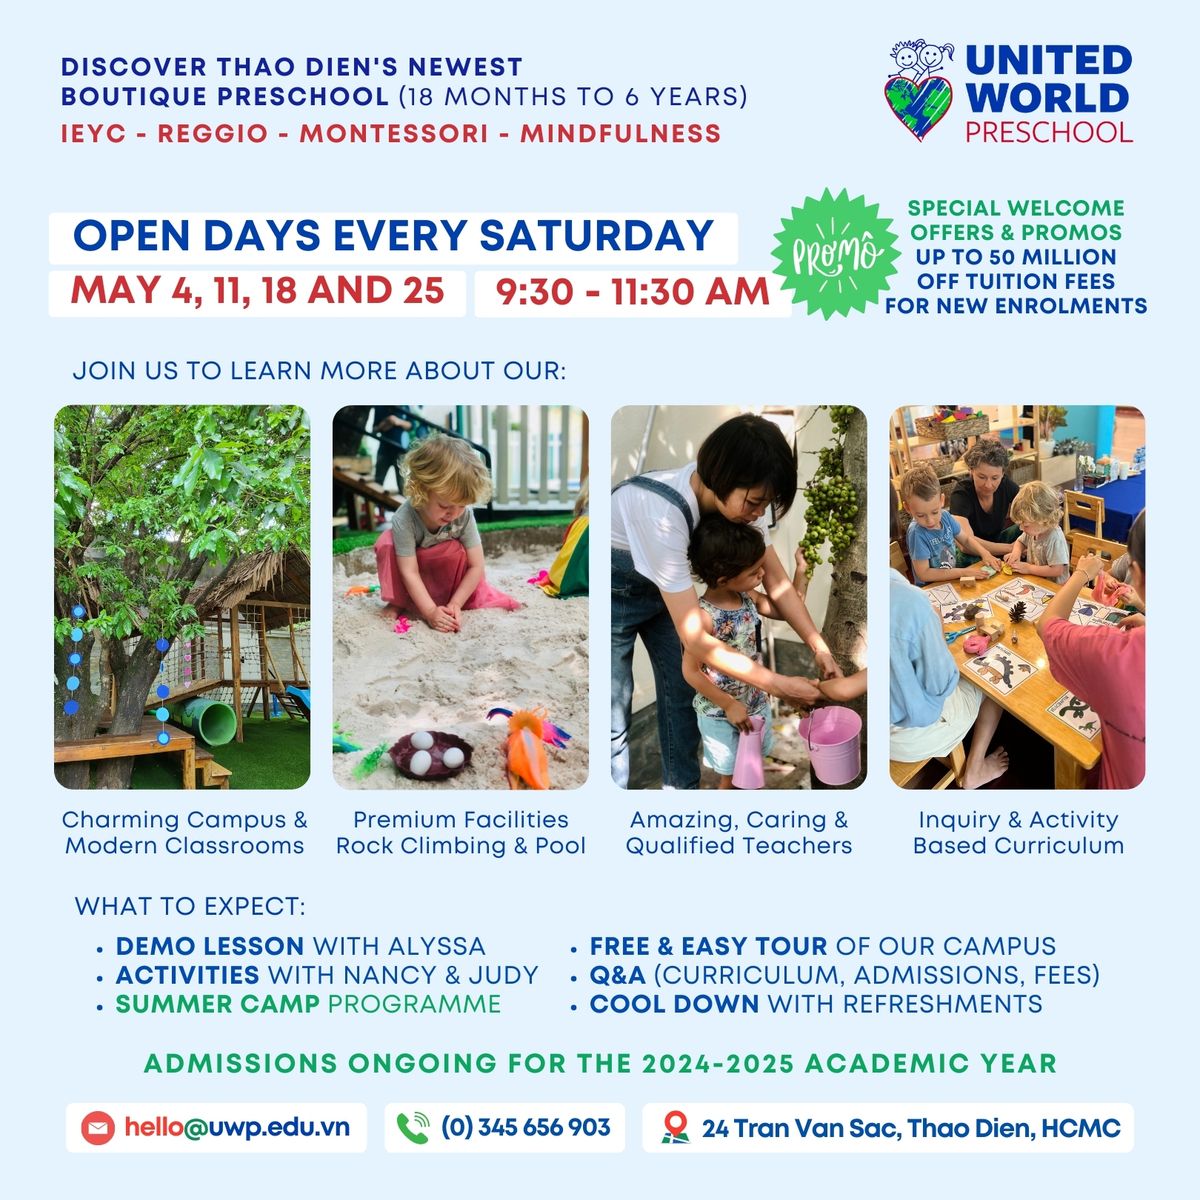 OPEN DAY(S) AT UNITED WORLD PRESCHOOL THAO DIEN - EVERY SATURDAY IN MAY FROM 9:30-11:30AM